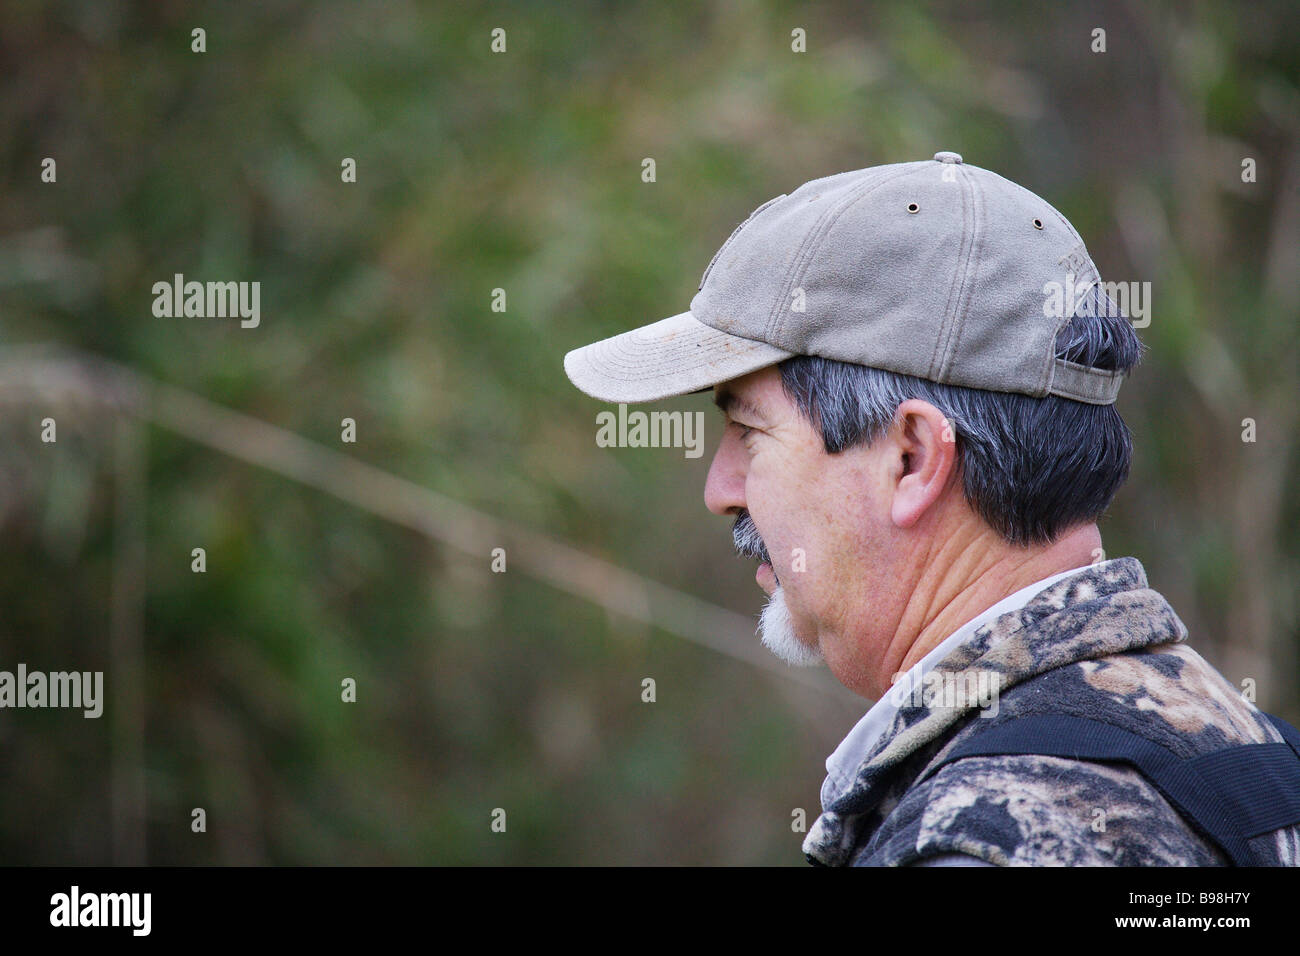 SIDE VIEW CLOSEUP HUNTING GUIDE BROWNING HAT BROWNING VEST GRAYING HAIR Stock Photo